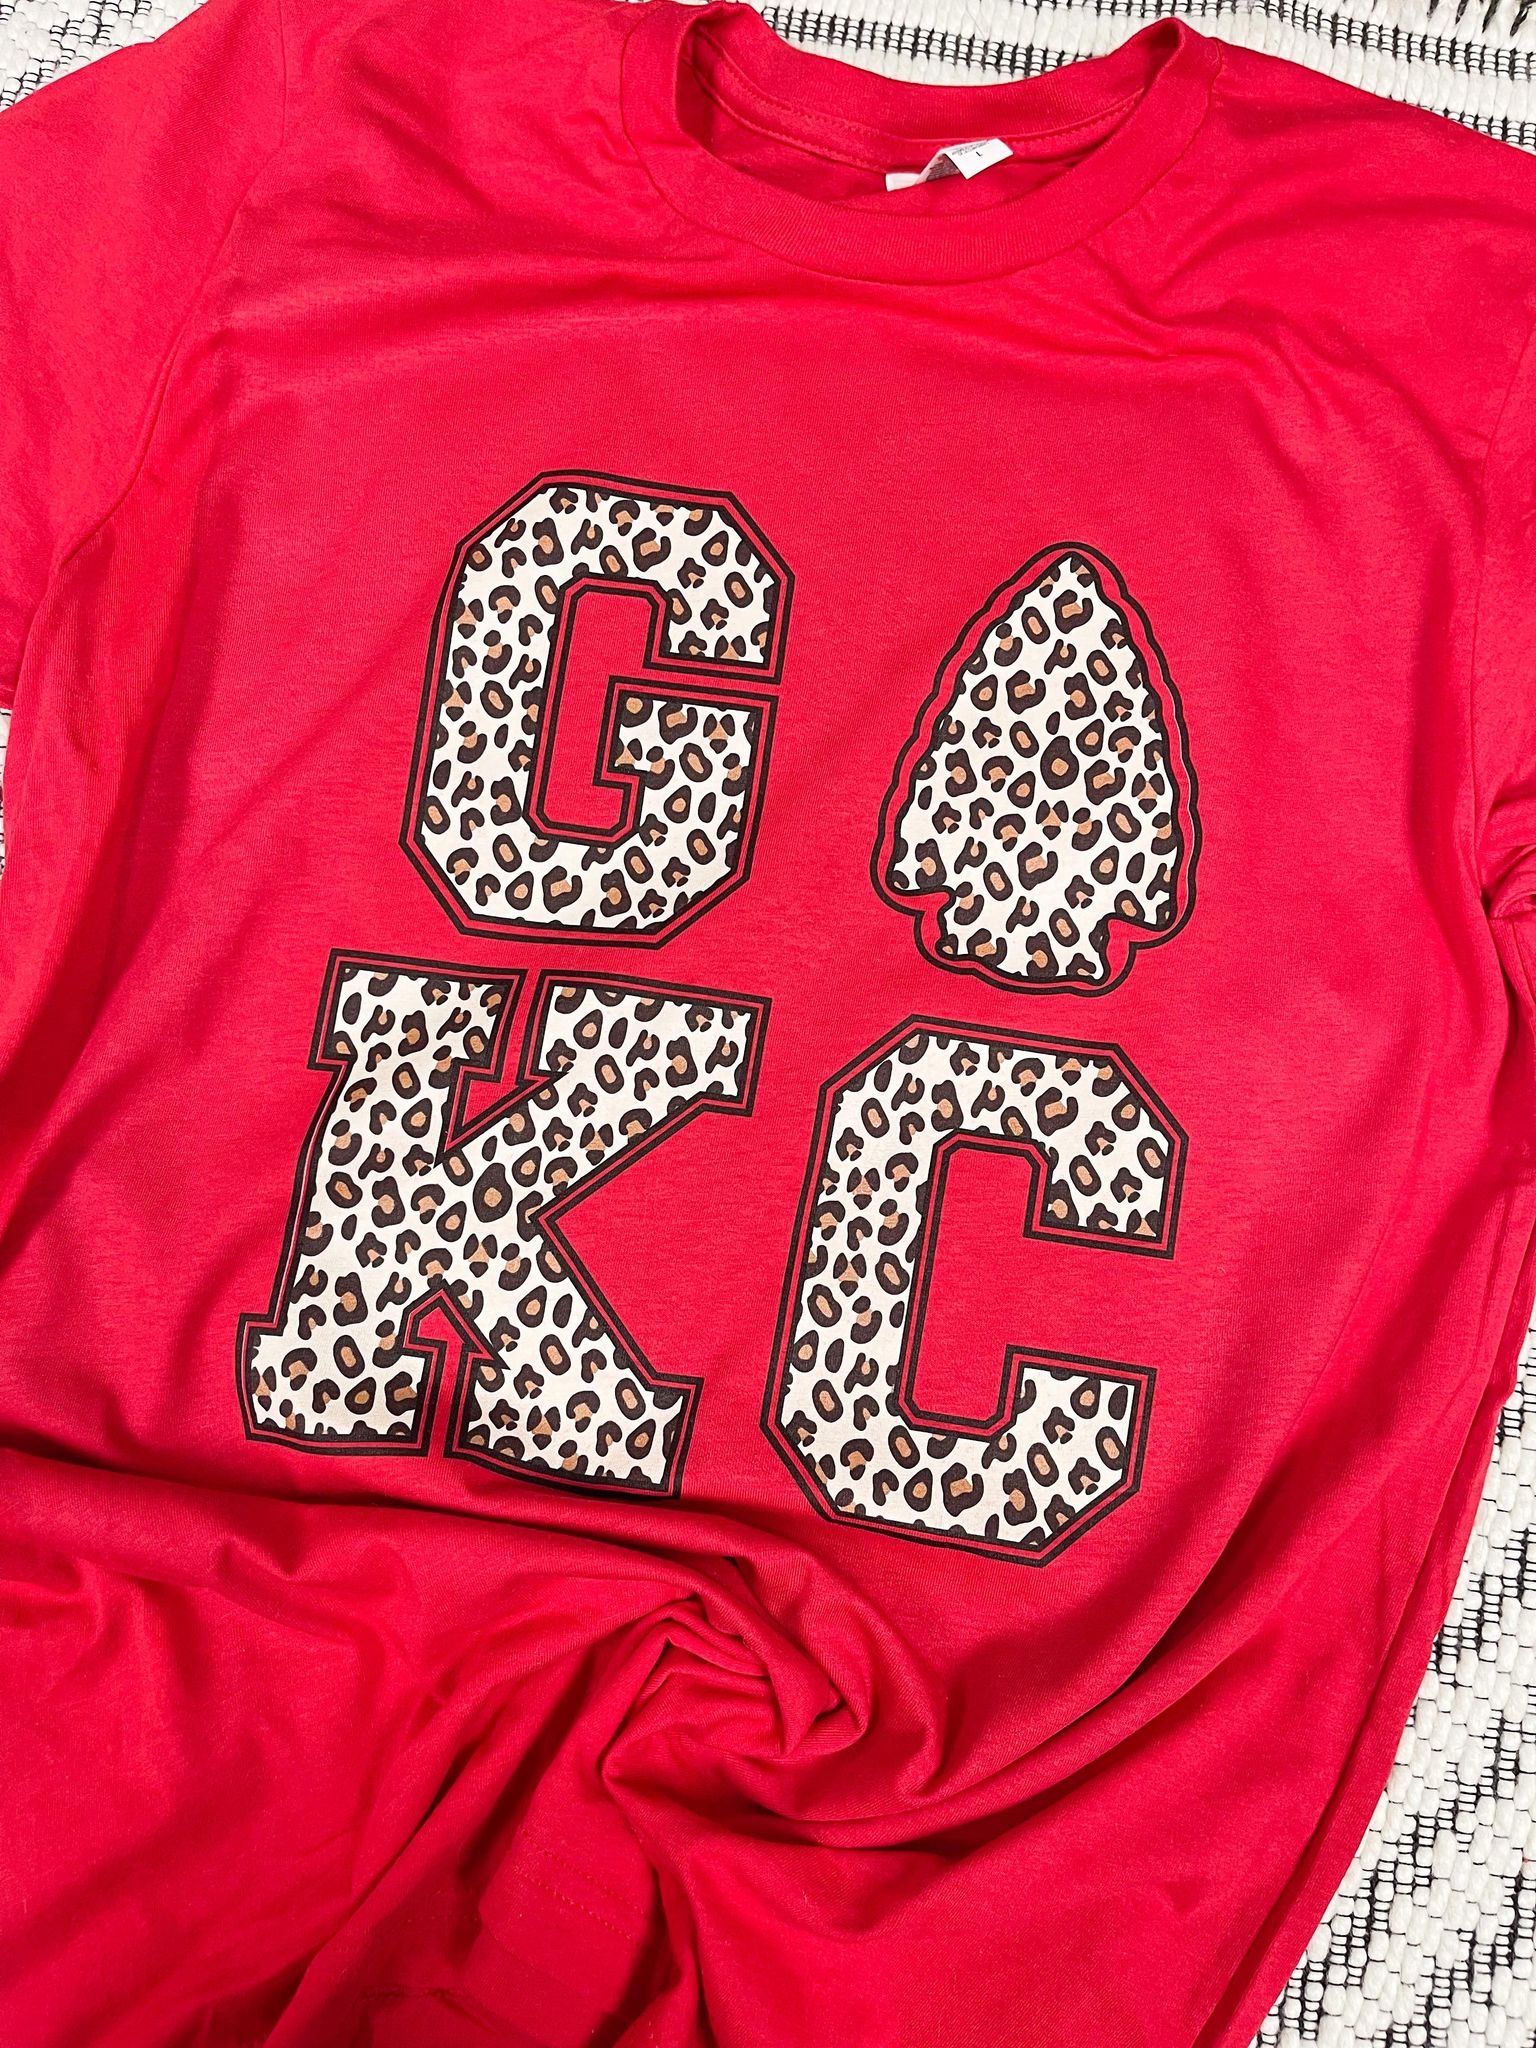 Cream Leopard GO KC Red Tee - The Red Rival